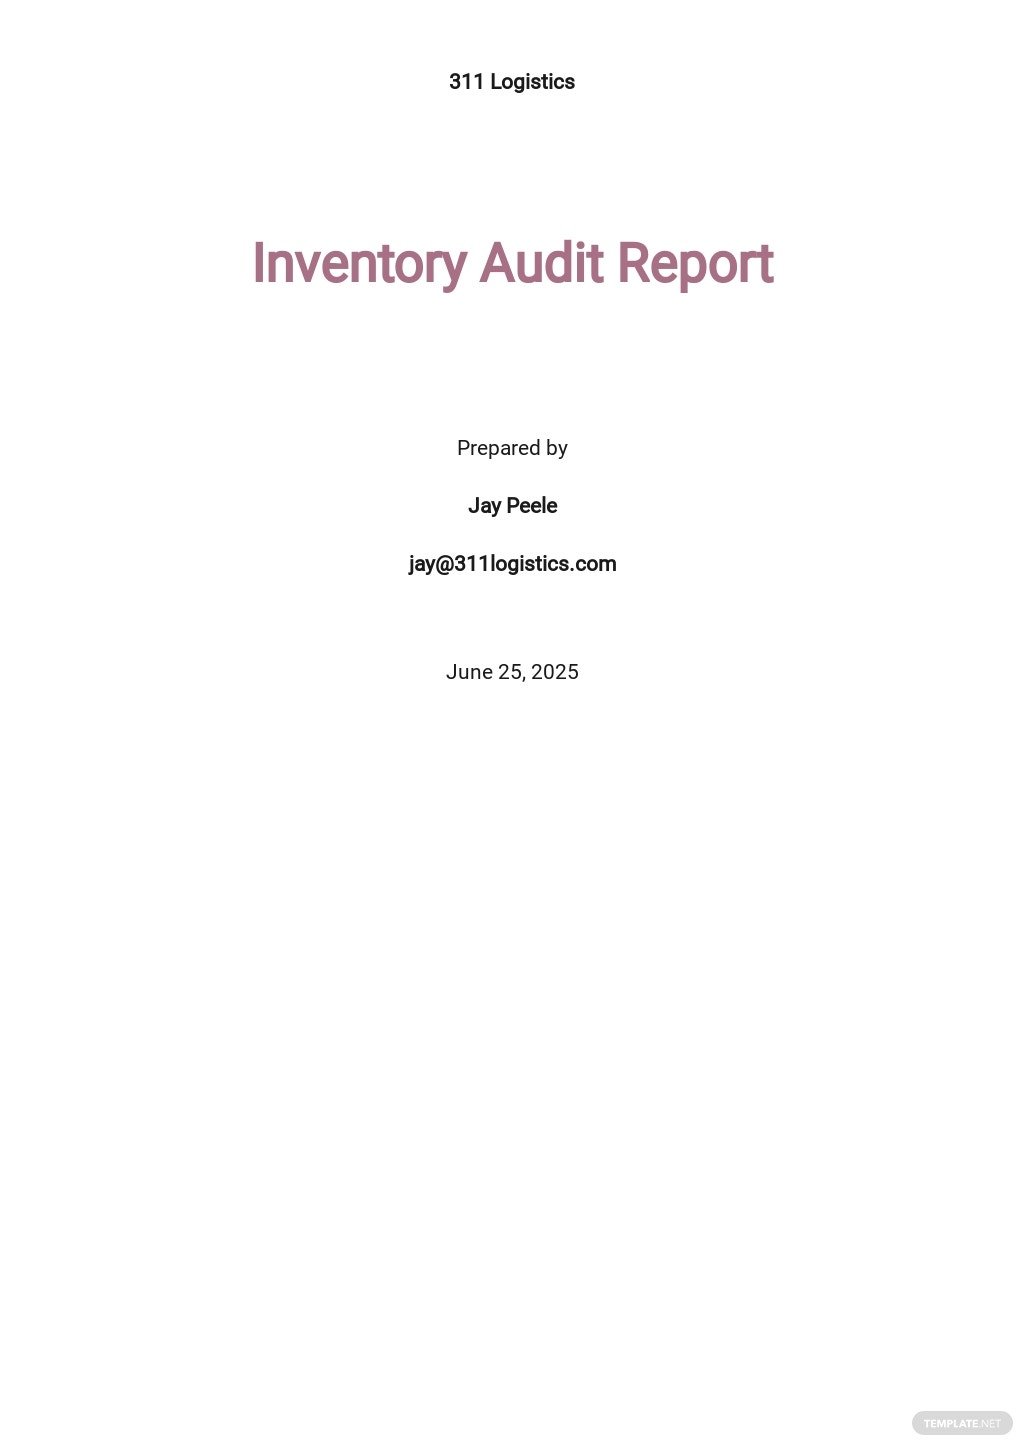 inventory audit report template